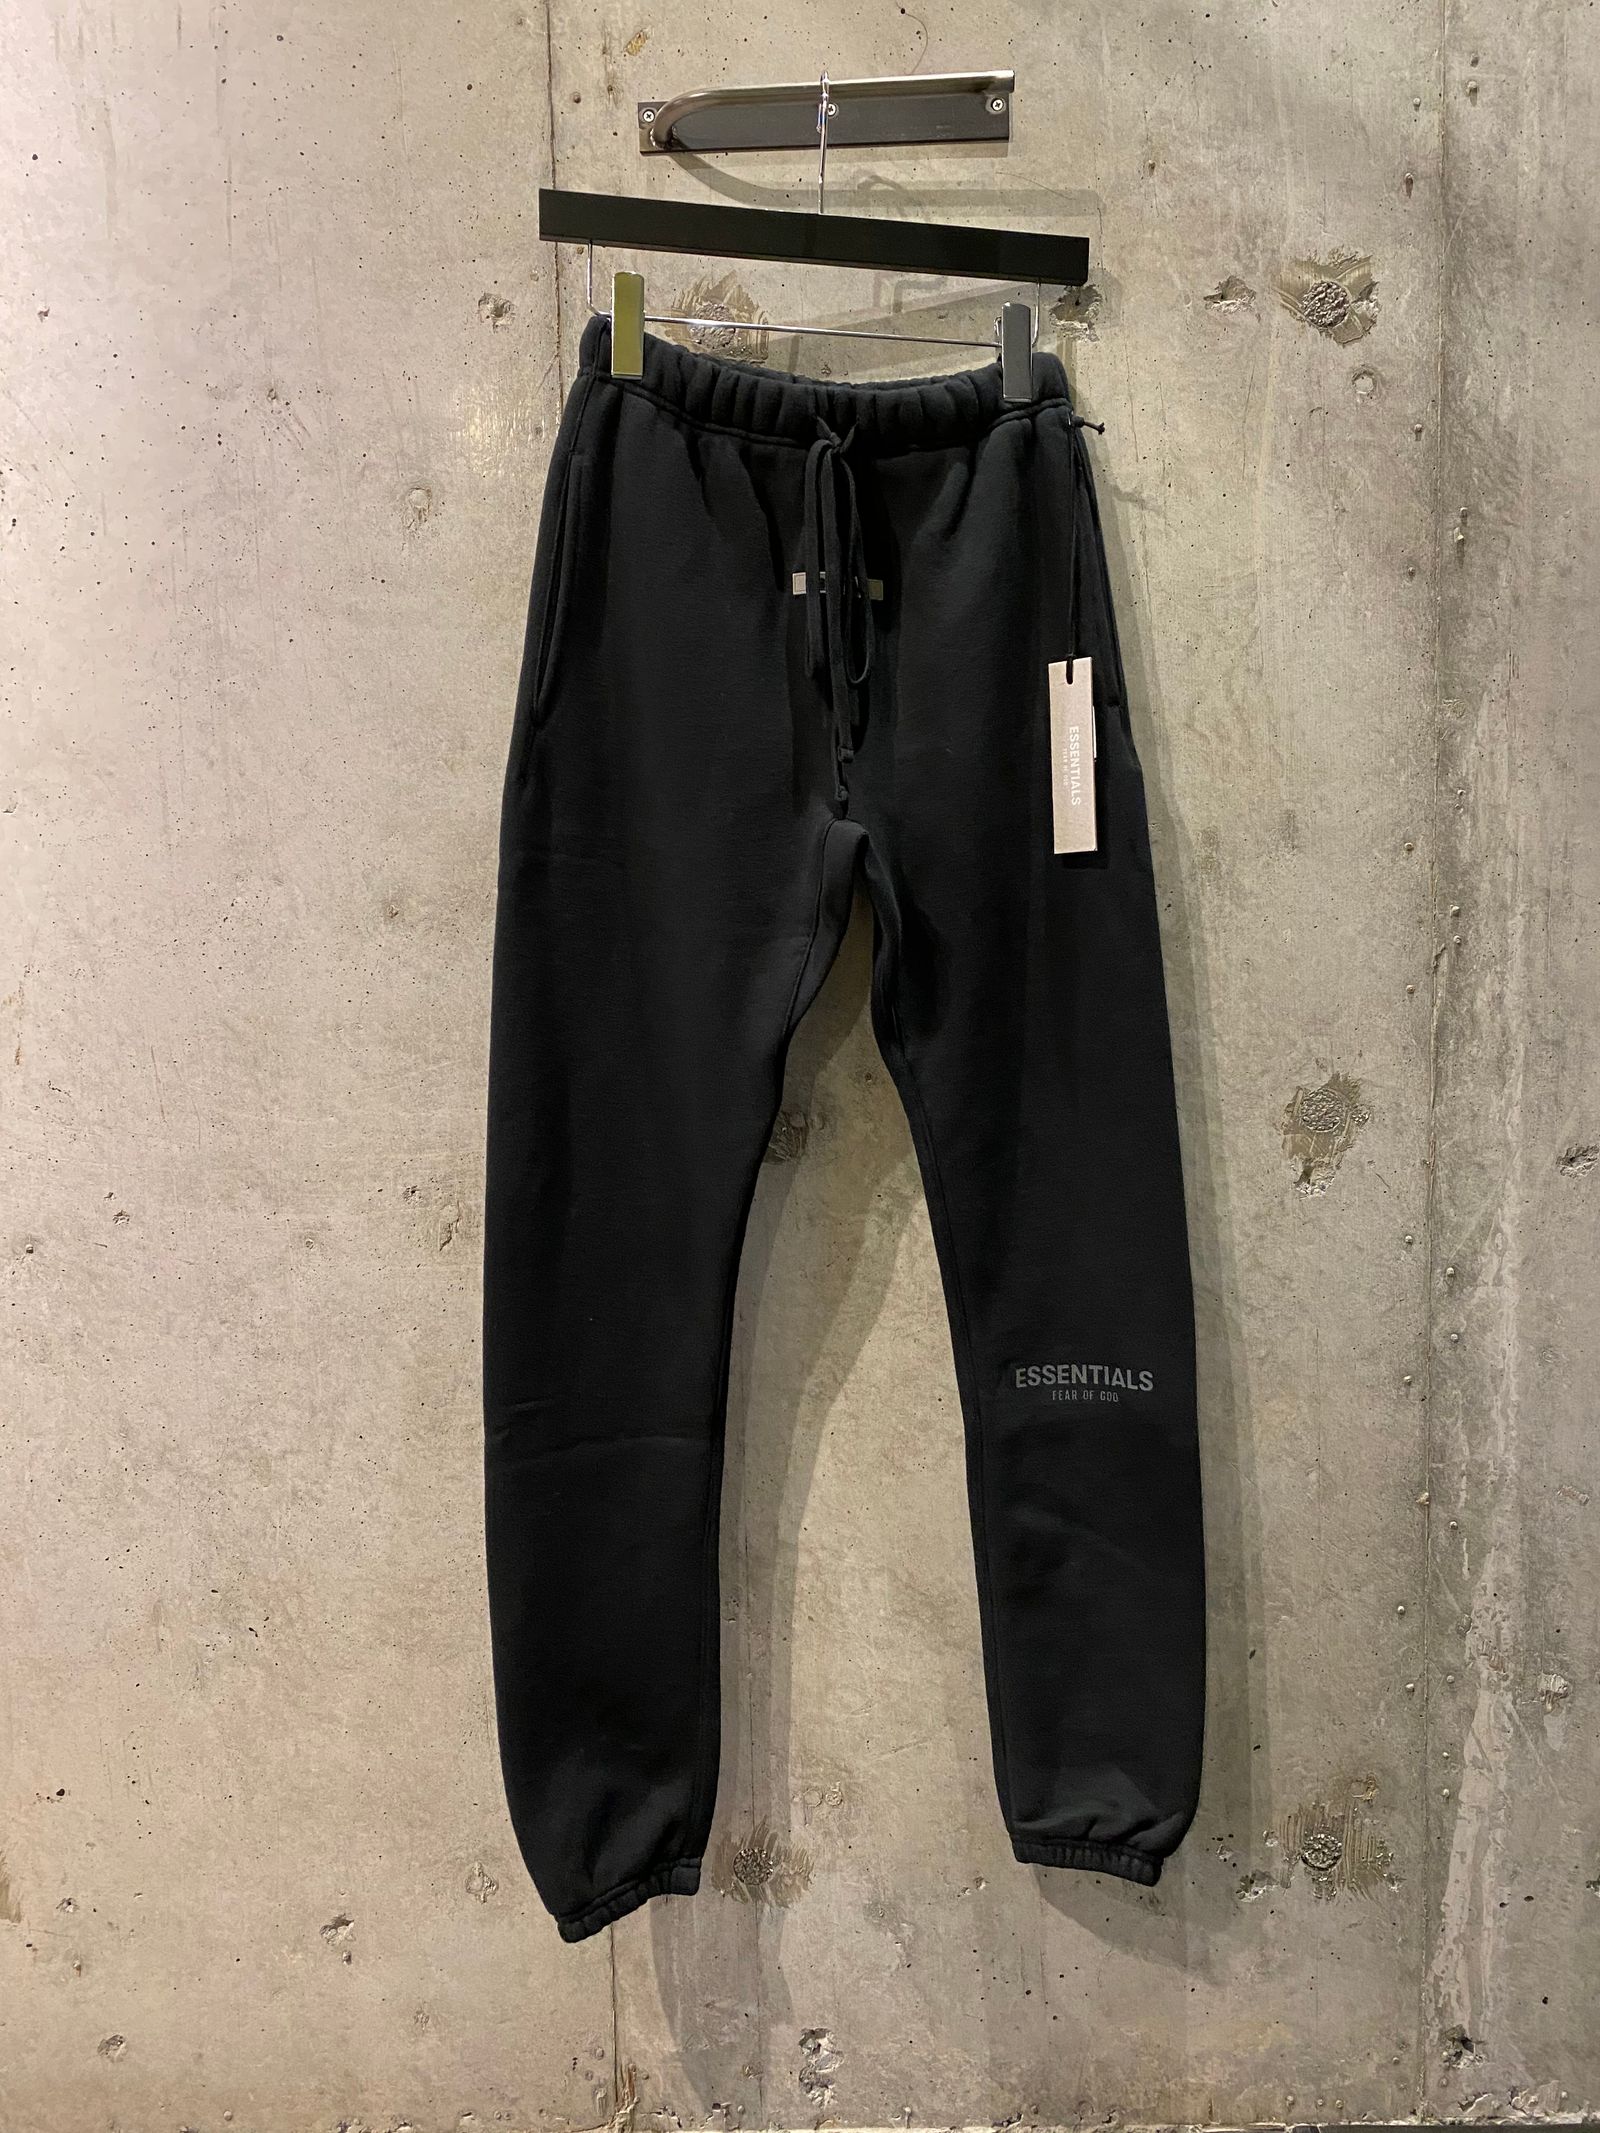 FOG ESSENTIALS - FOG ESSENTIALS SWEAT PANTS/BLACK | R and another